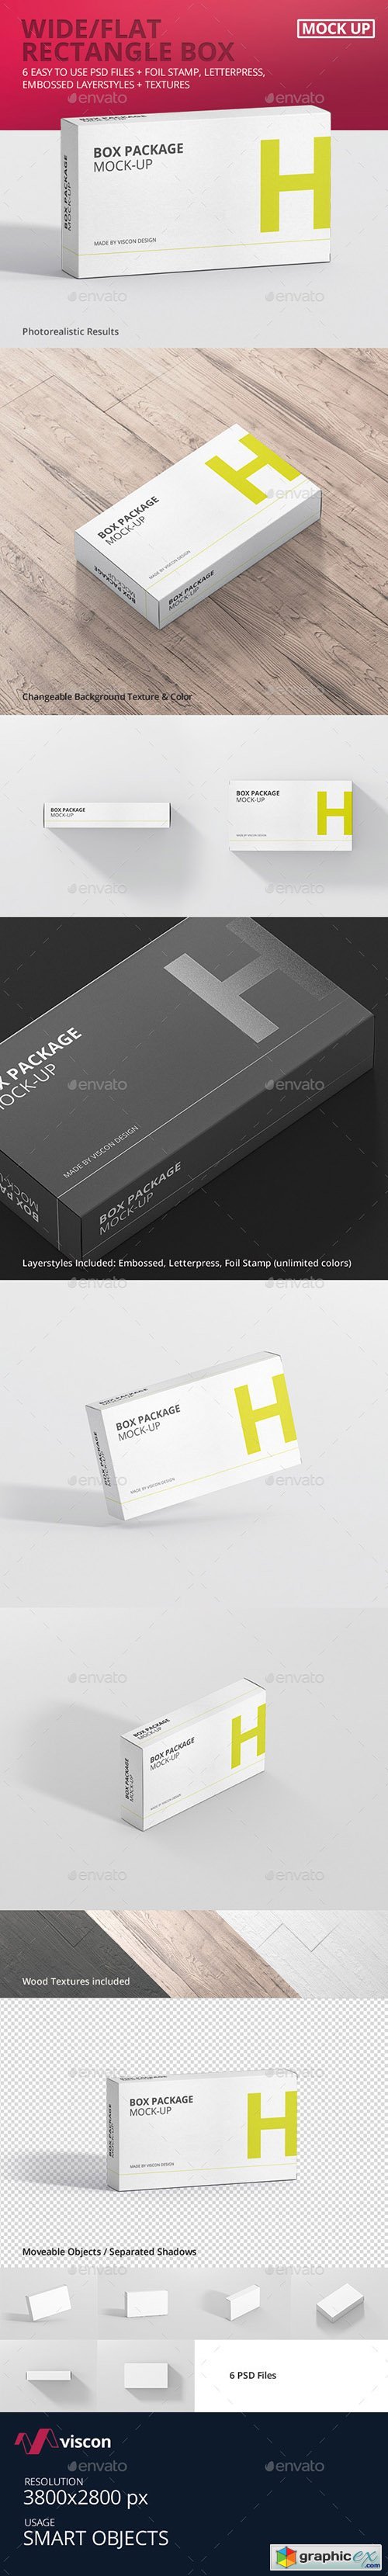 Package Box Mock-Up - Wide / Flat Rectangle 16930613